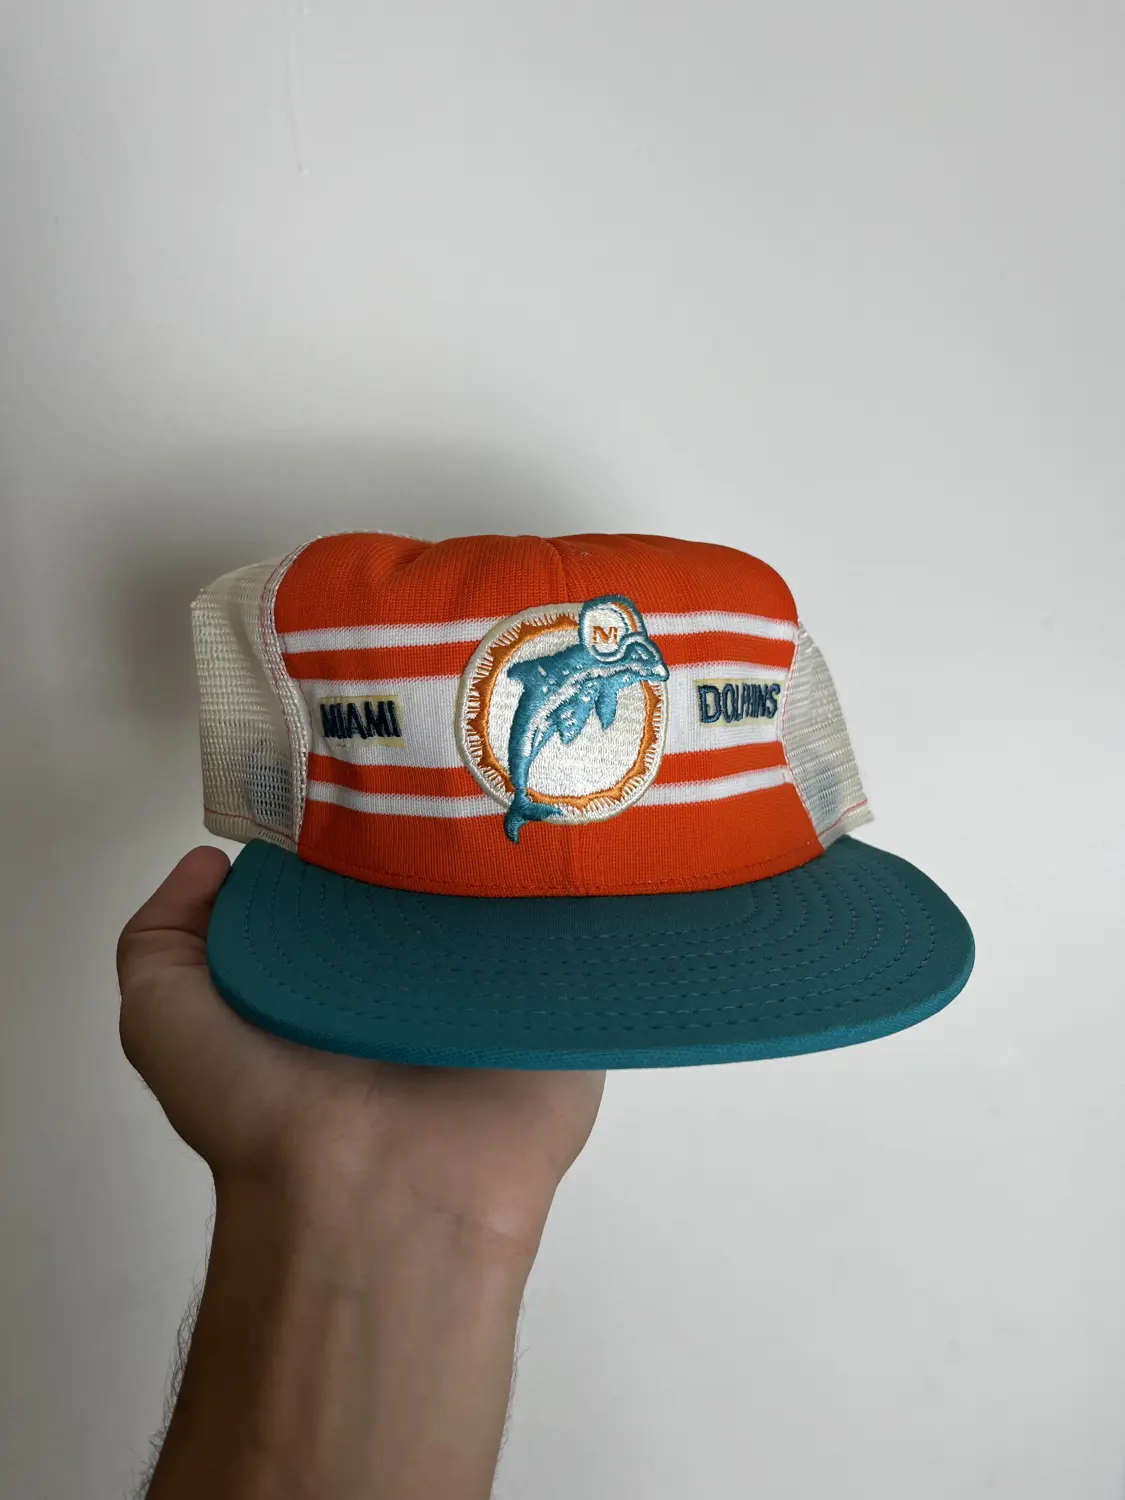 70s/80s Dolphins Hat